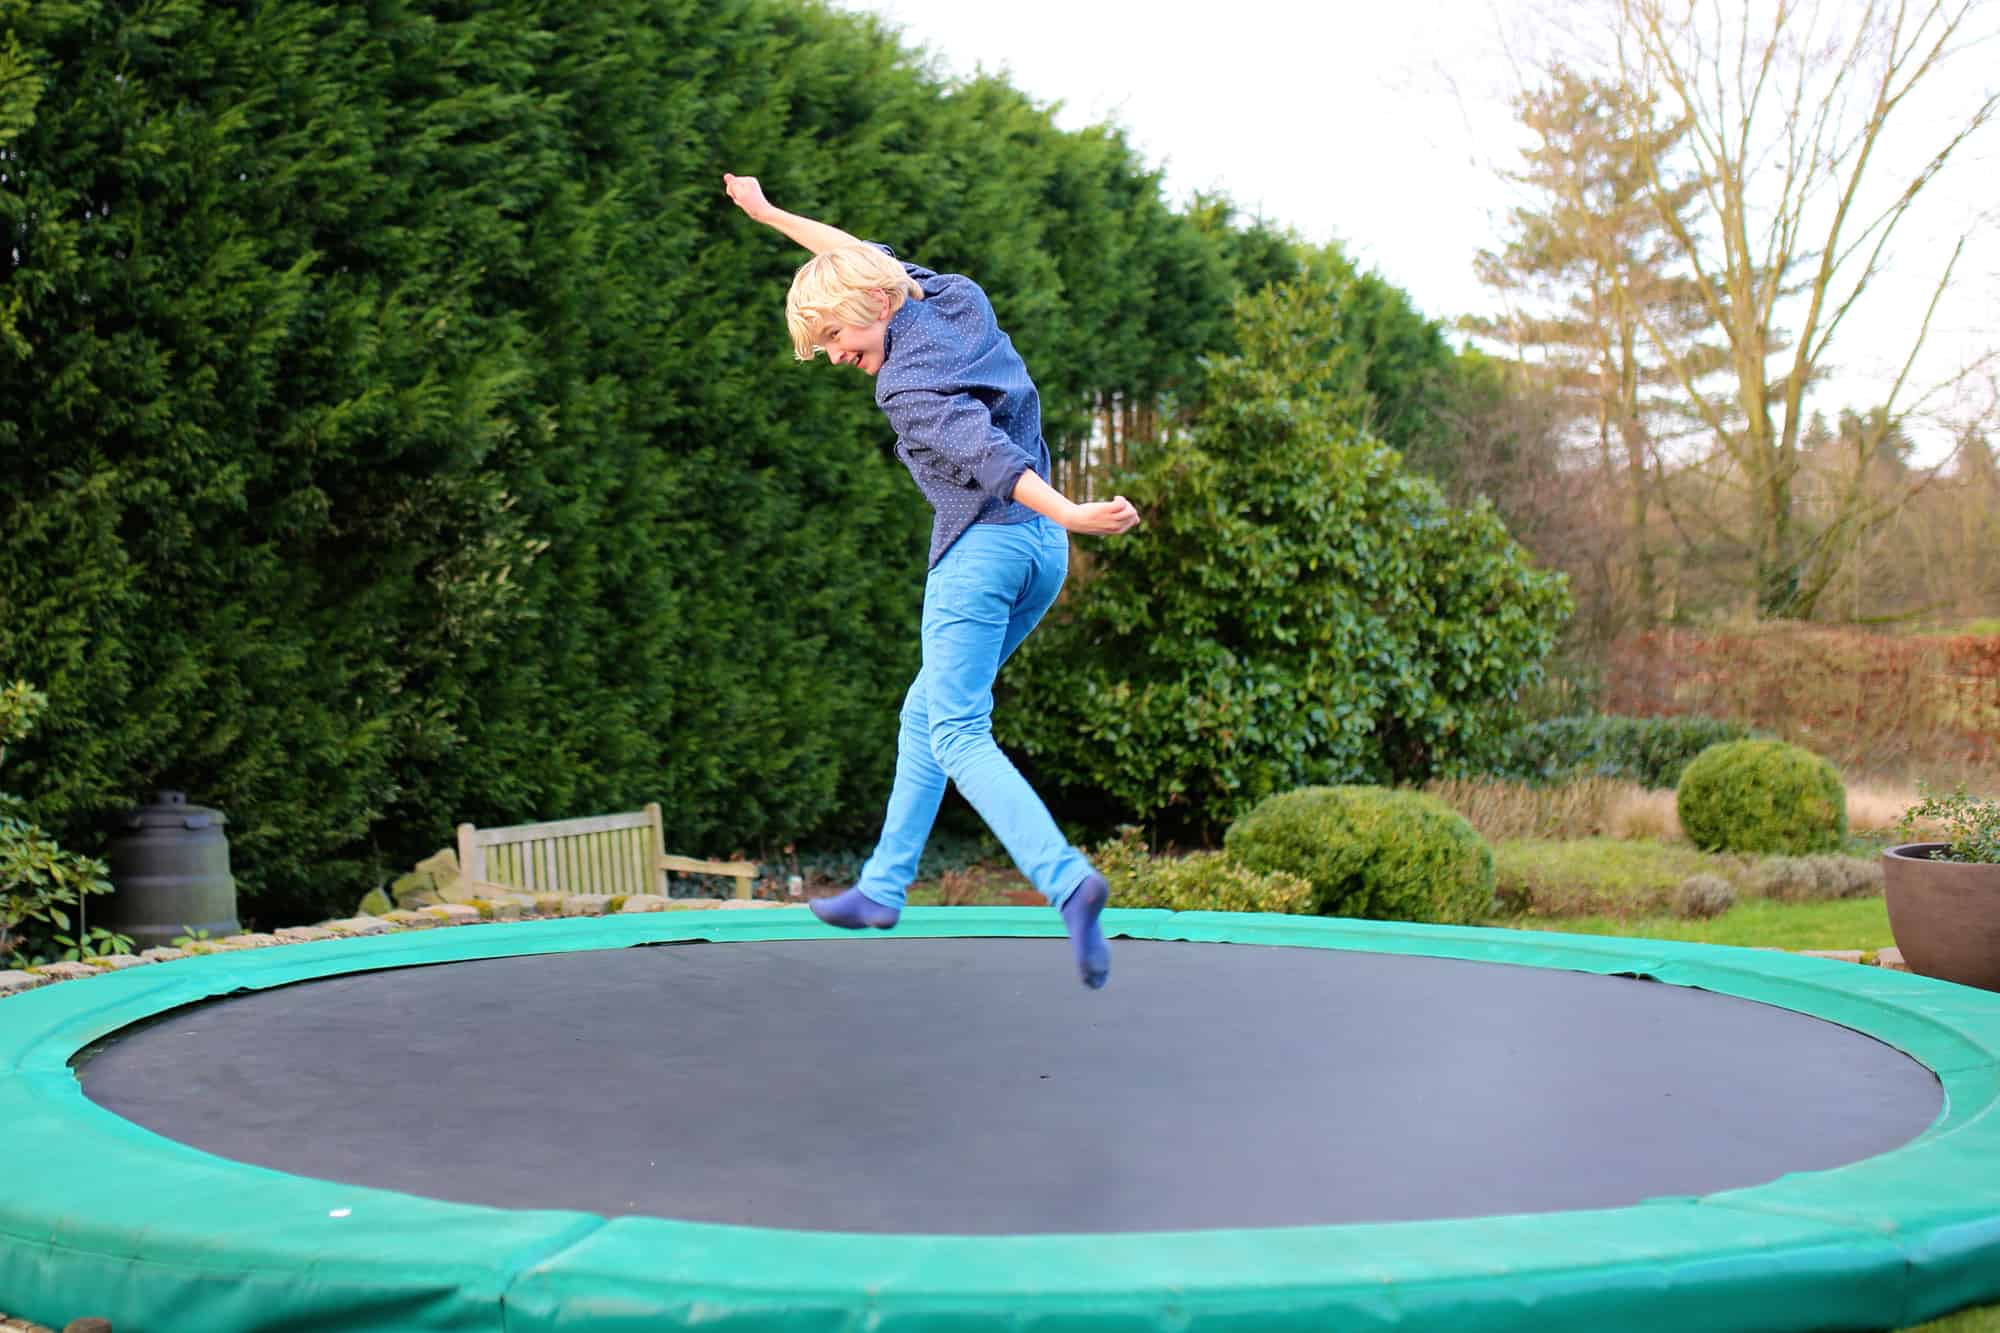 Happy kid plays outdoors in garden jumping high in the sky on trampoline. Active teenager boy having fun outdoors at early spring day. Healthy lifestyle concept.